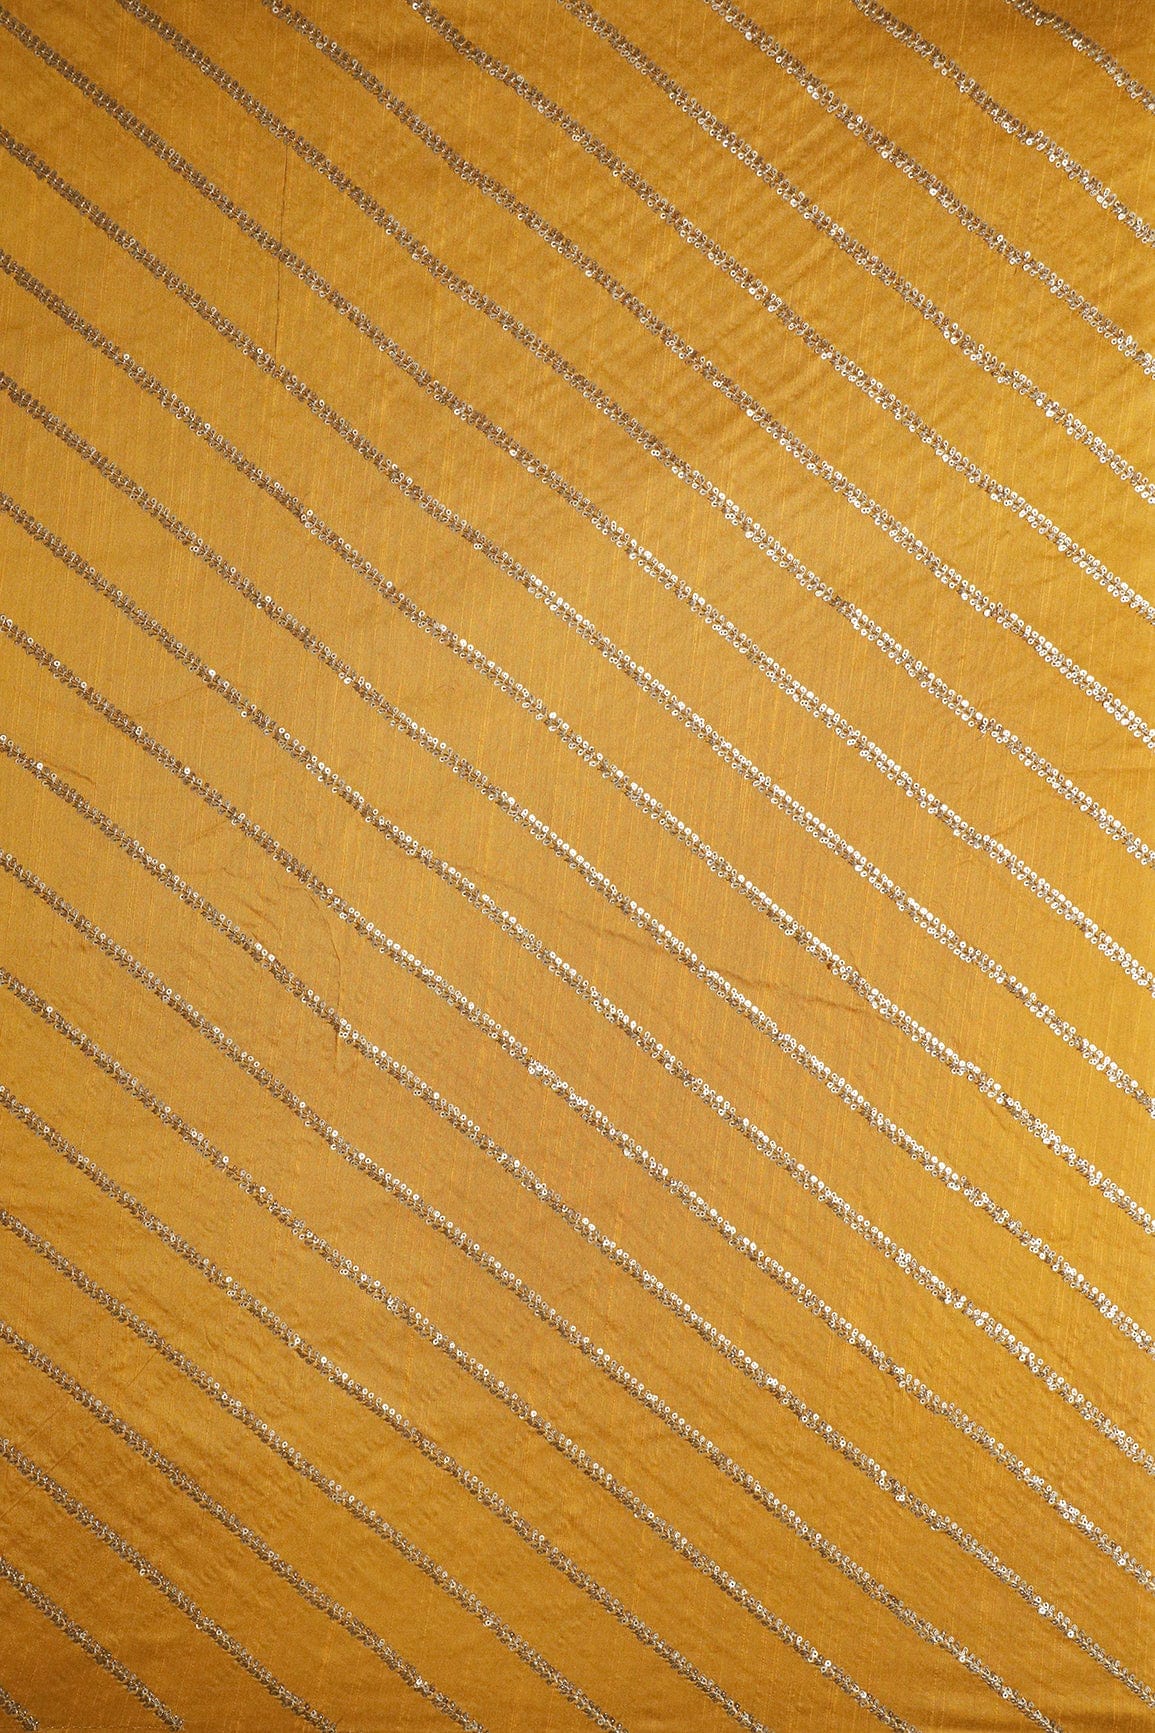 doeraa Embroidery Fabrics Gold Sequins With Gold Zari Stripes Embroidery Work On Mustard Yellow Raw Silk Fabric